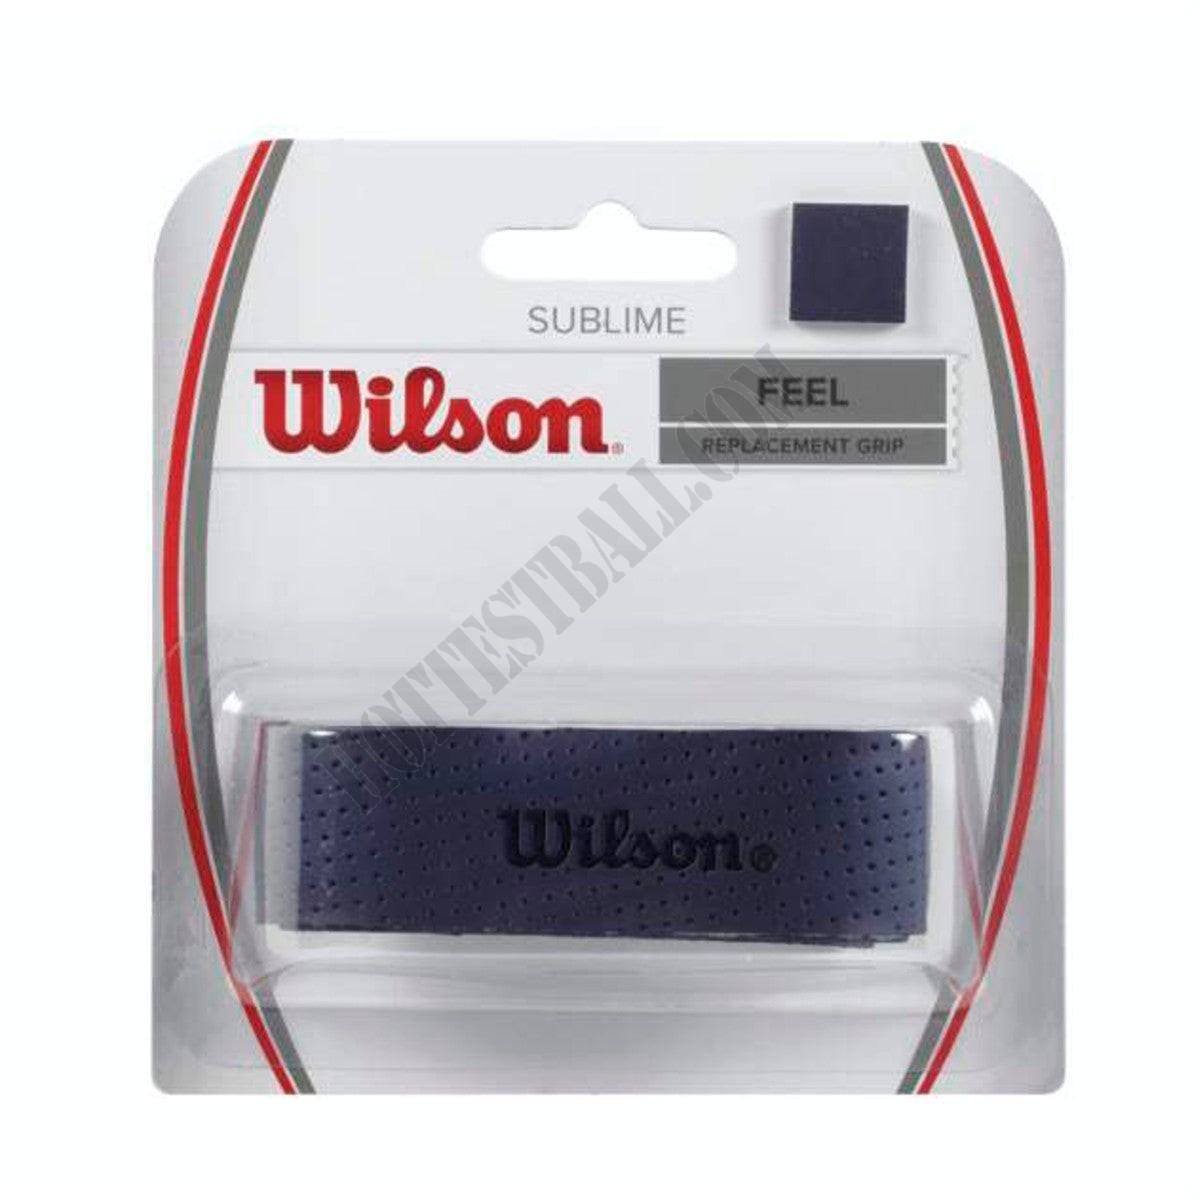 Sublime Replacement Grip - Wilson Discount Store - -4